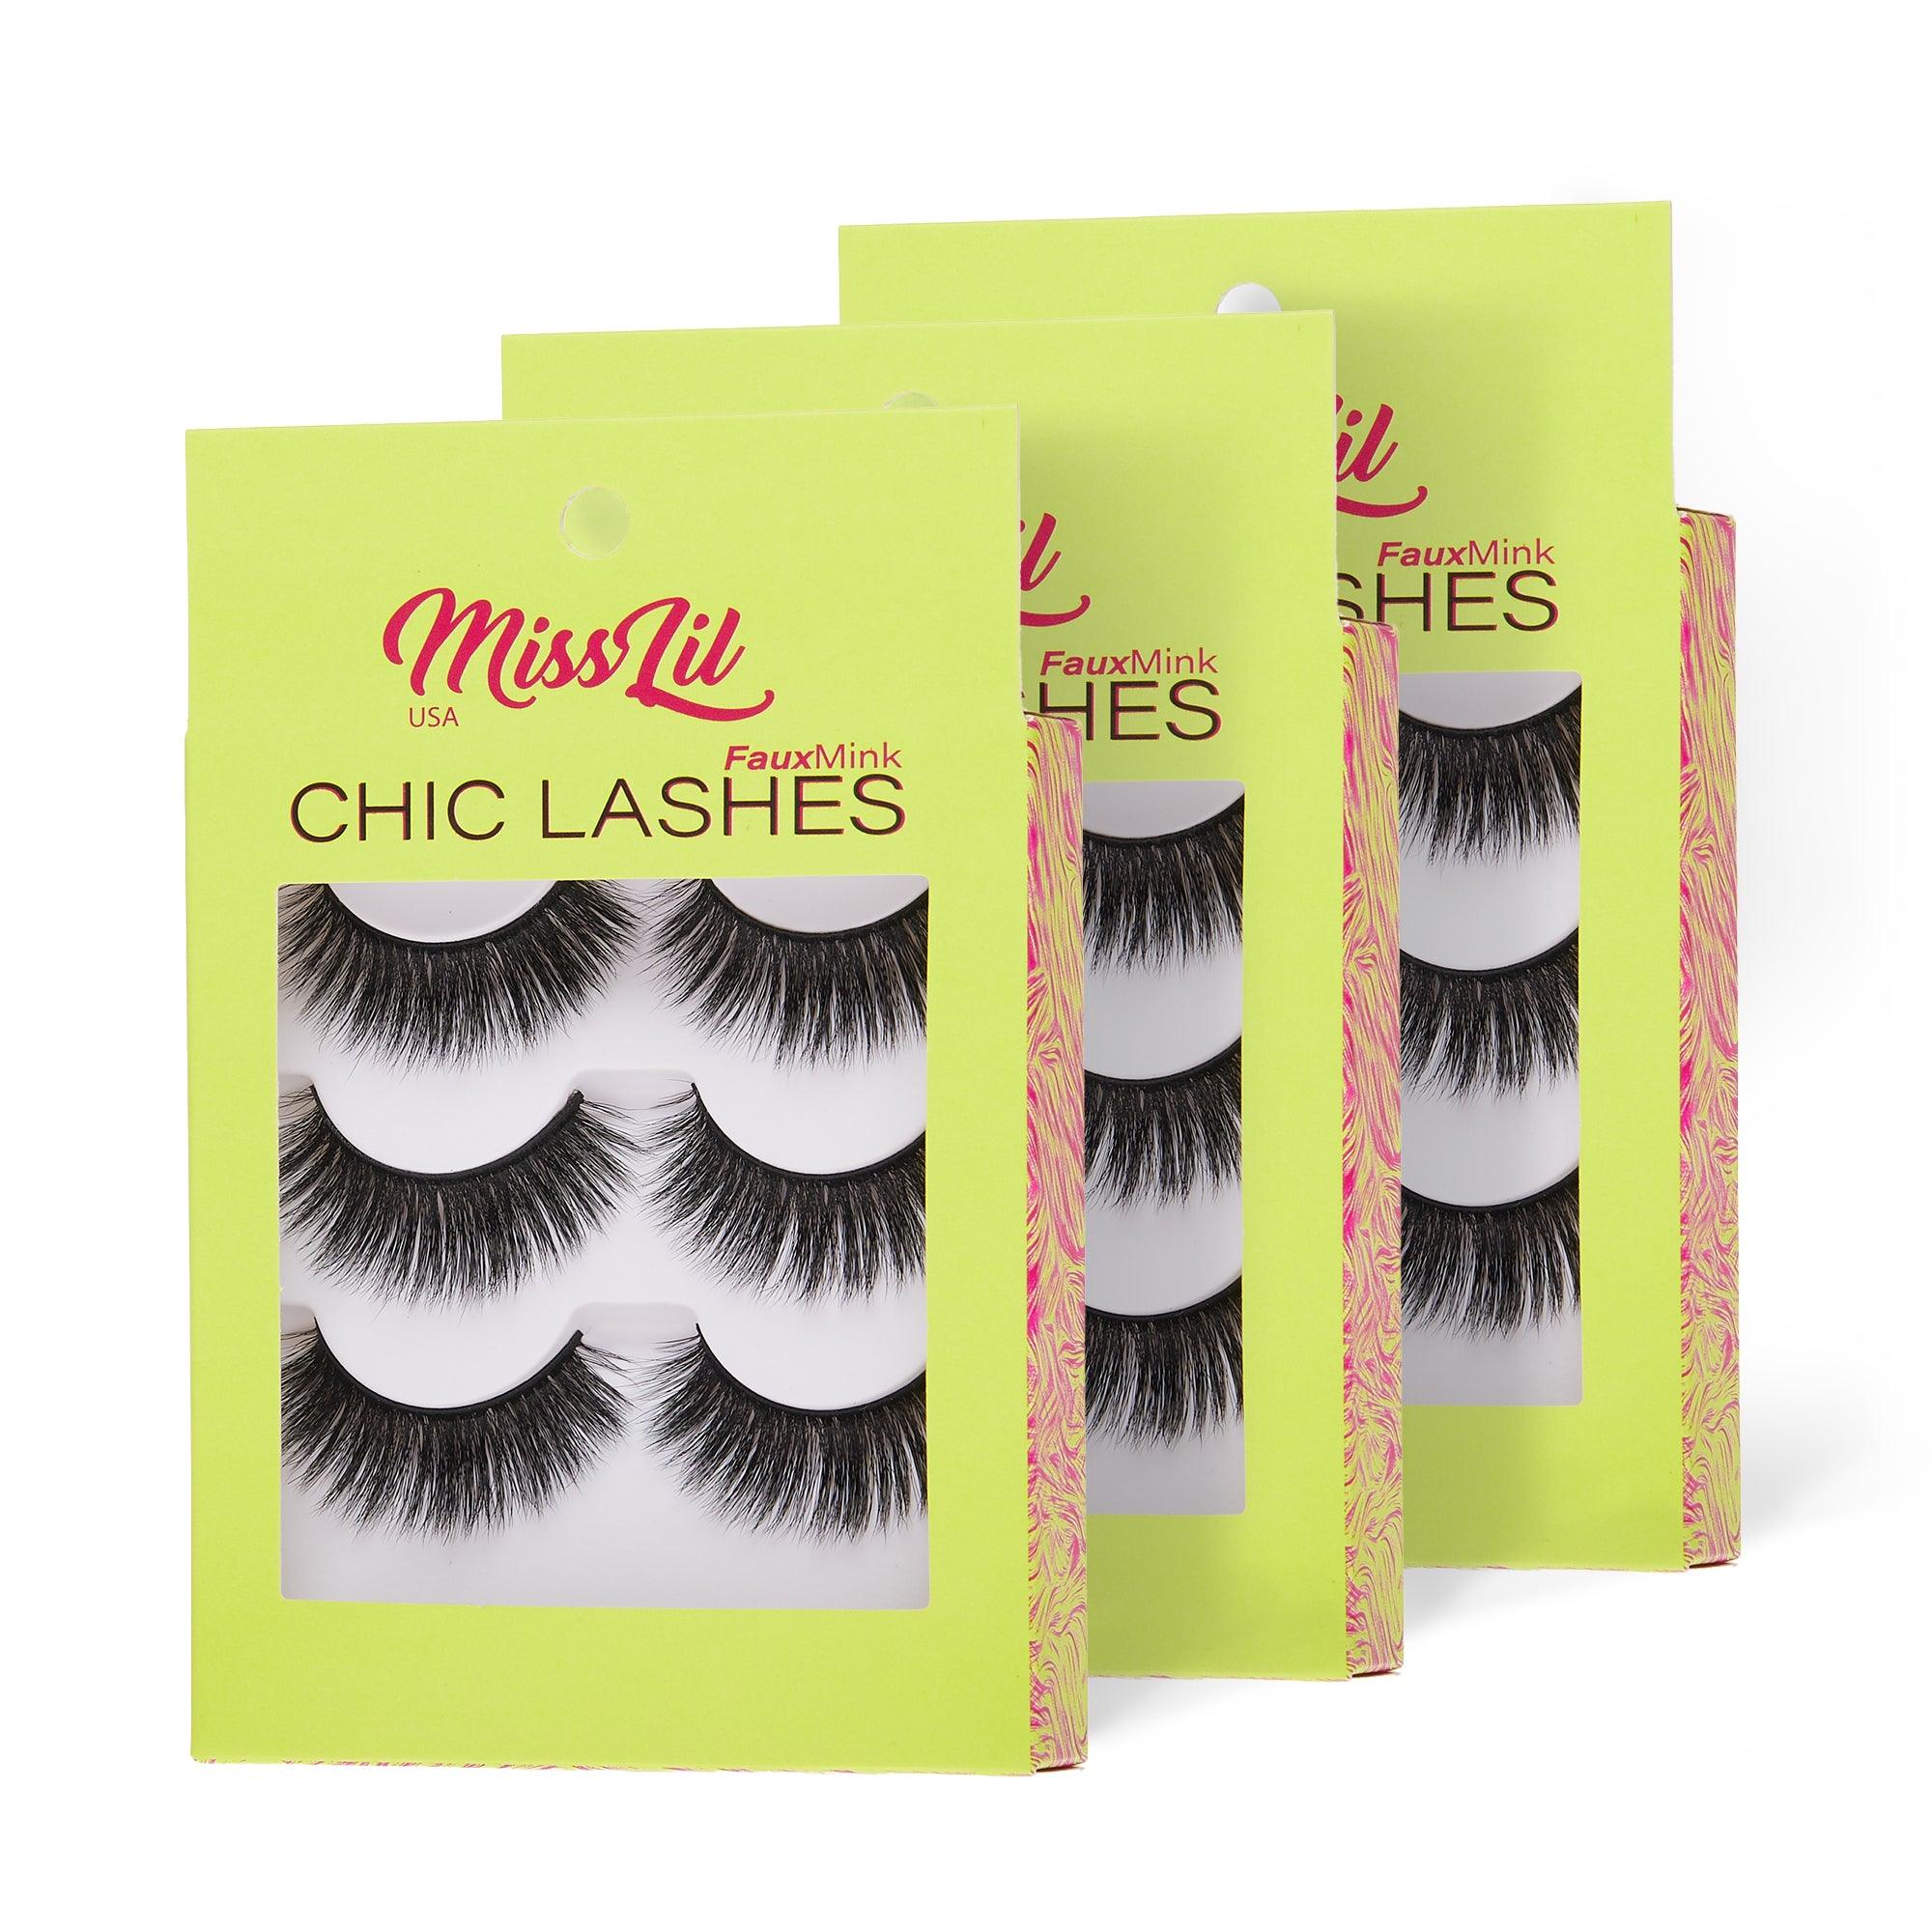 3-Pair Faux Mink Eyelashes - Chic Lashes Collection #37 - Pack of 3 - Miss Lil USA